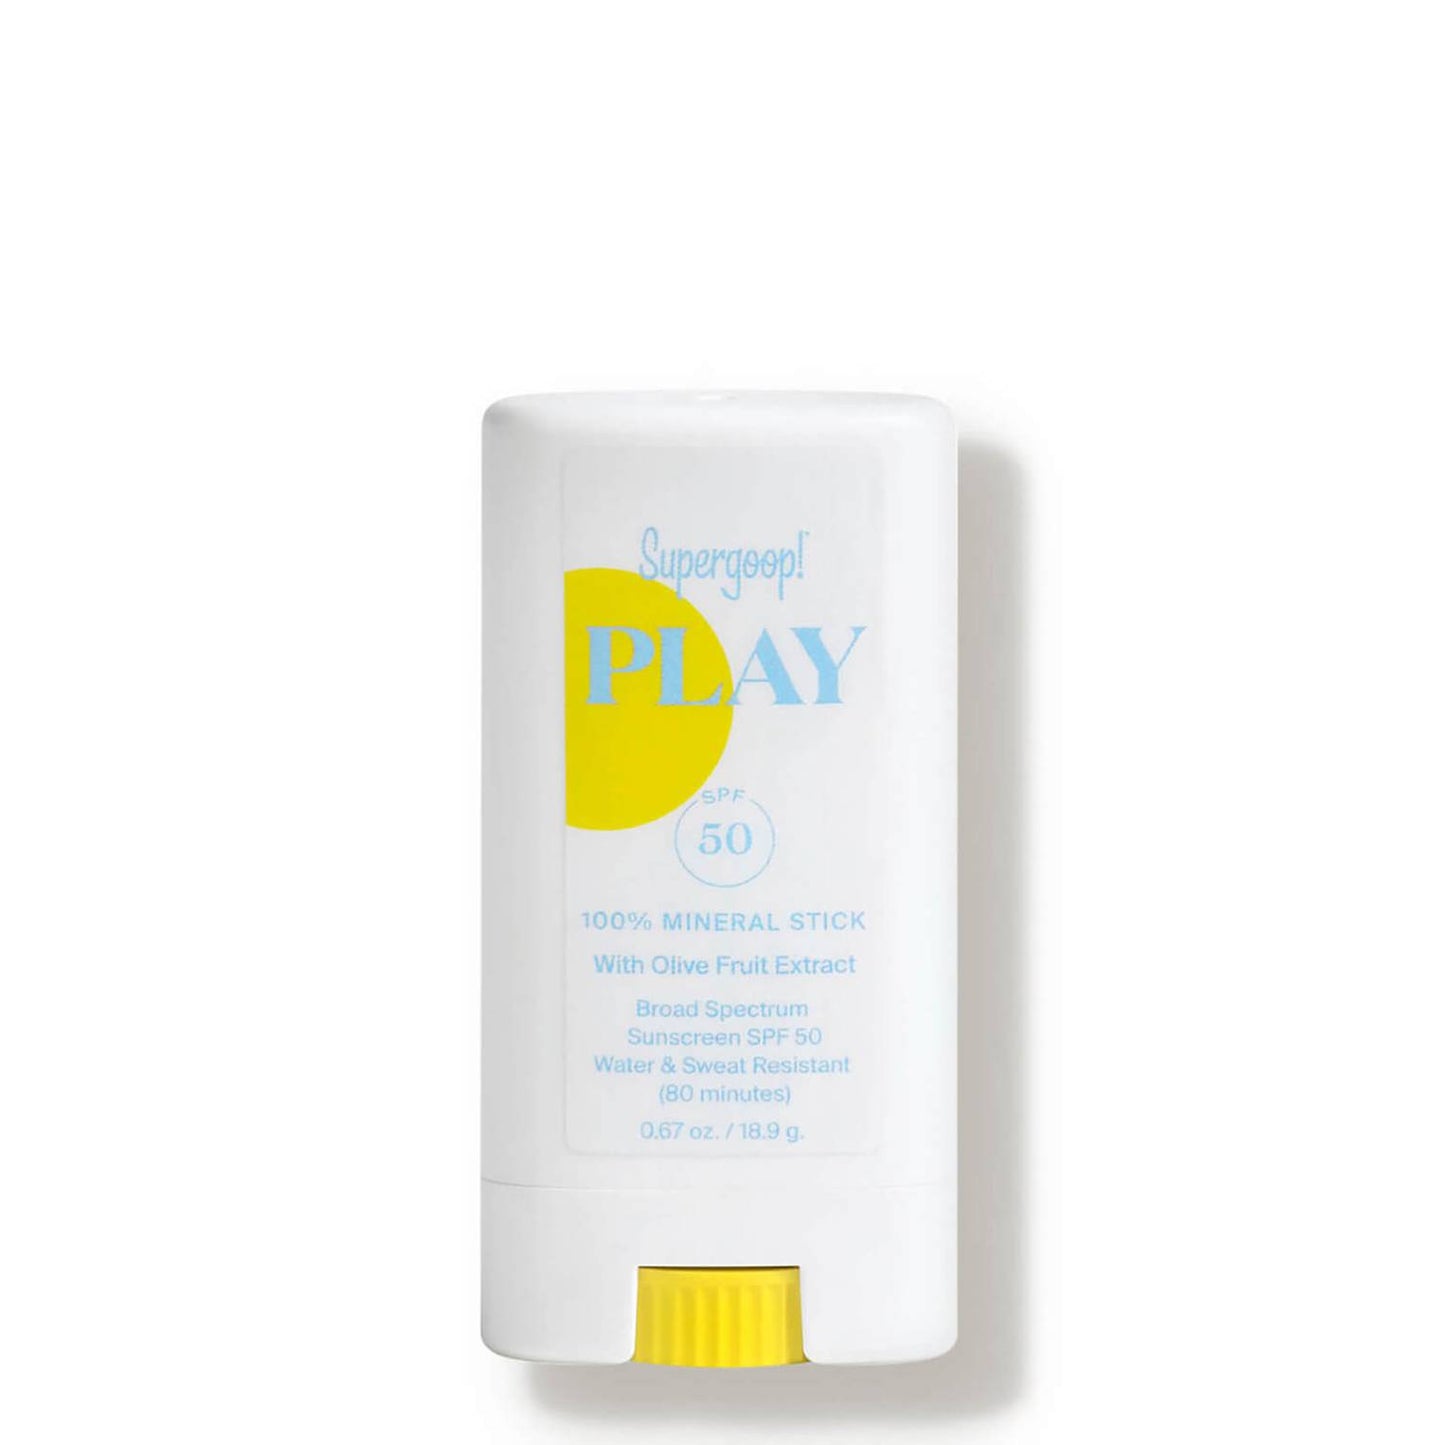 Supergoop!® PLAY 100 Mineral Stick SPF 50 with Olive Fruit Extract 0.67 oz.